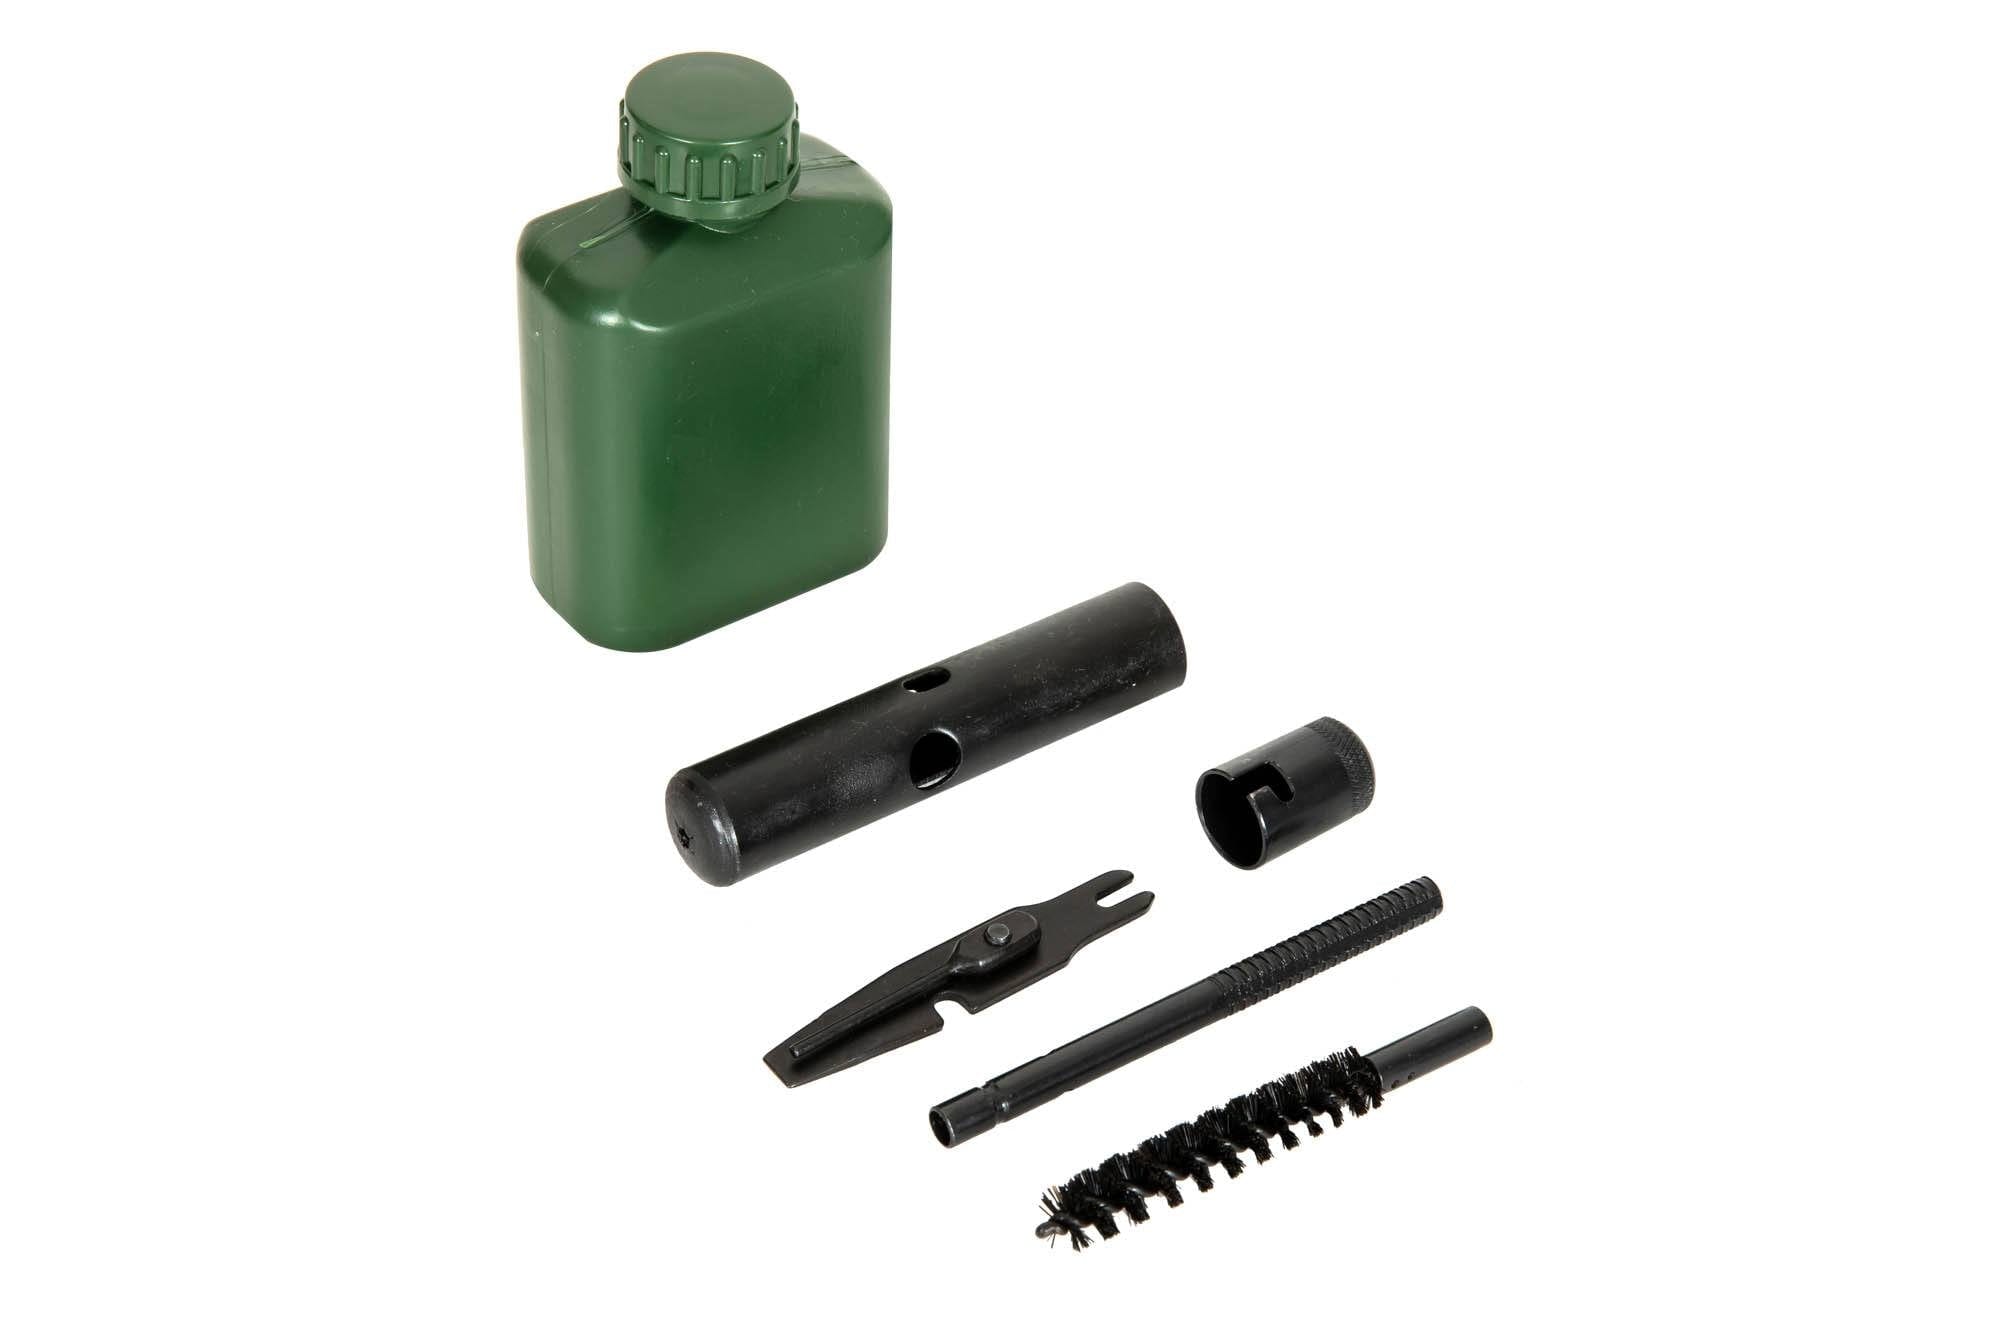 AK74N E&L maintenance and cleaning kit